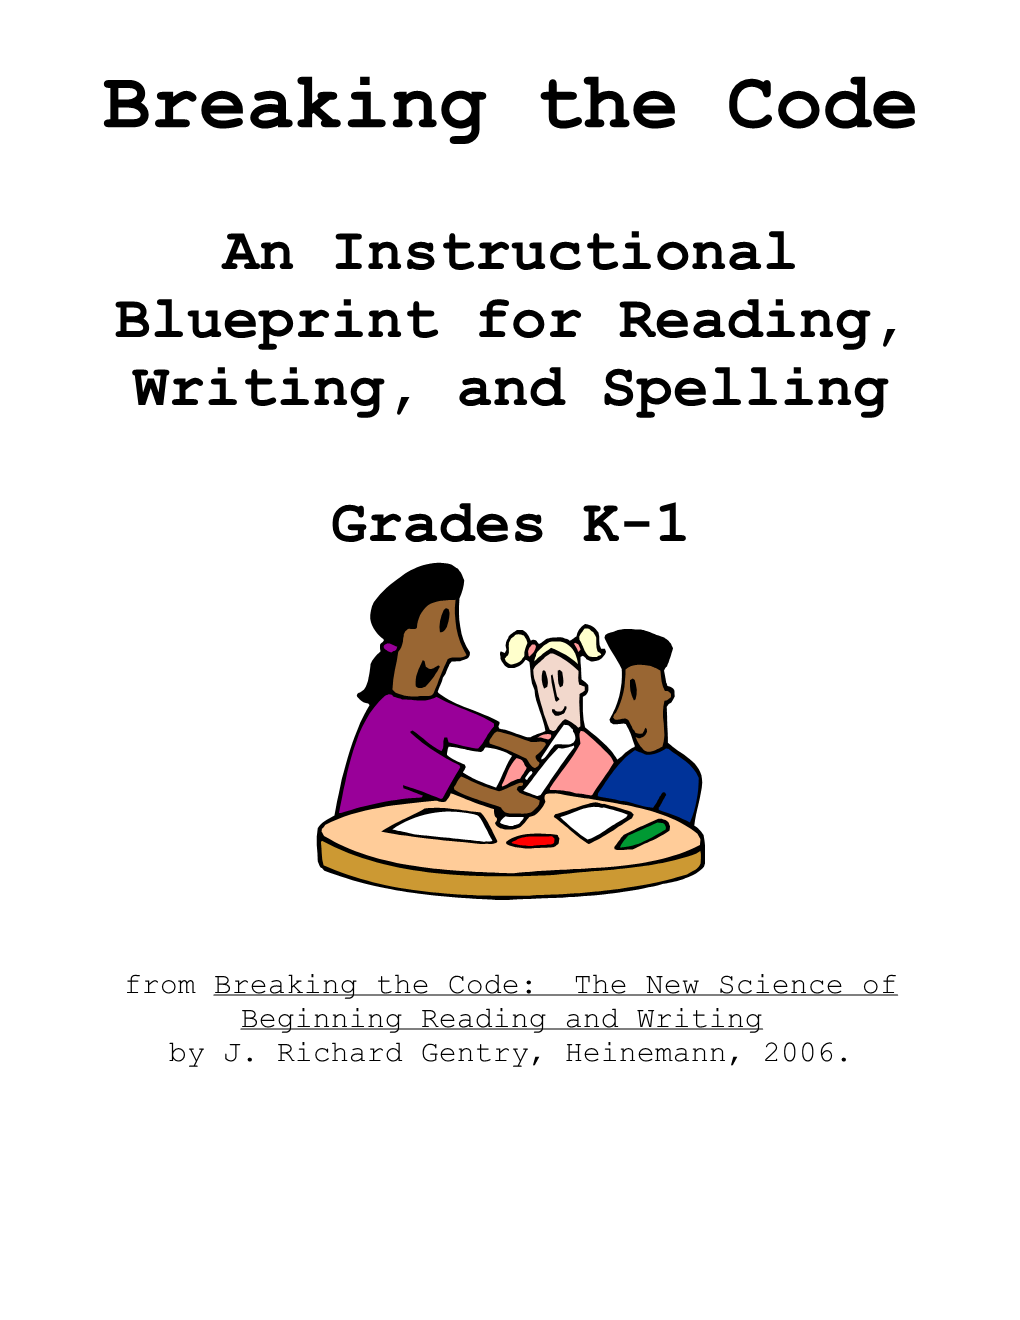 An Instructional Blueprint for Reading, Writing, and Spelling